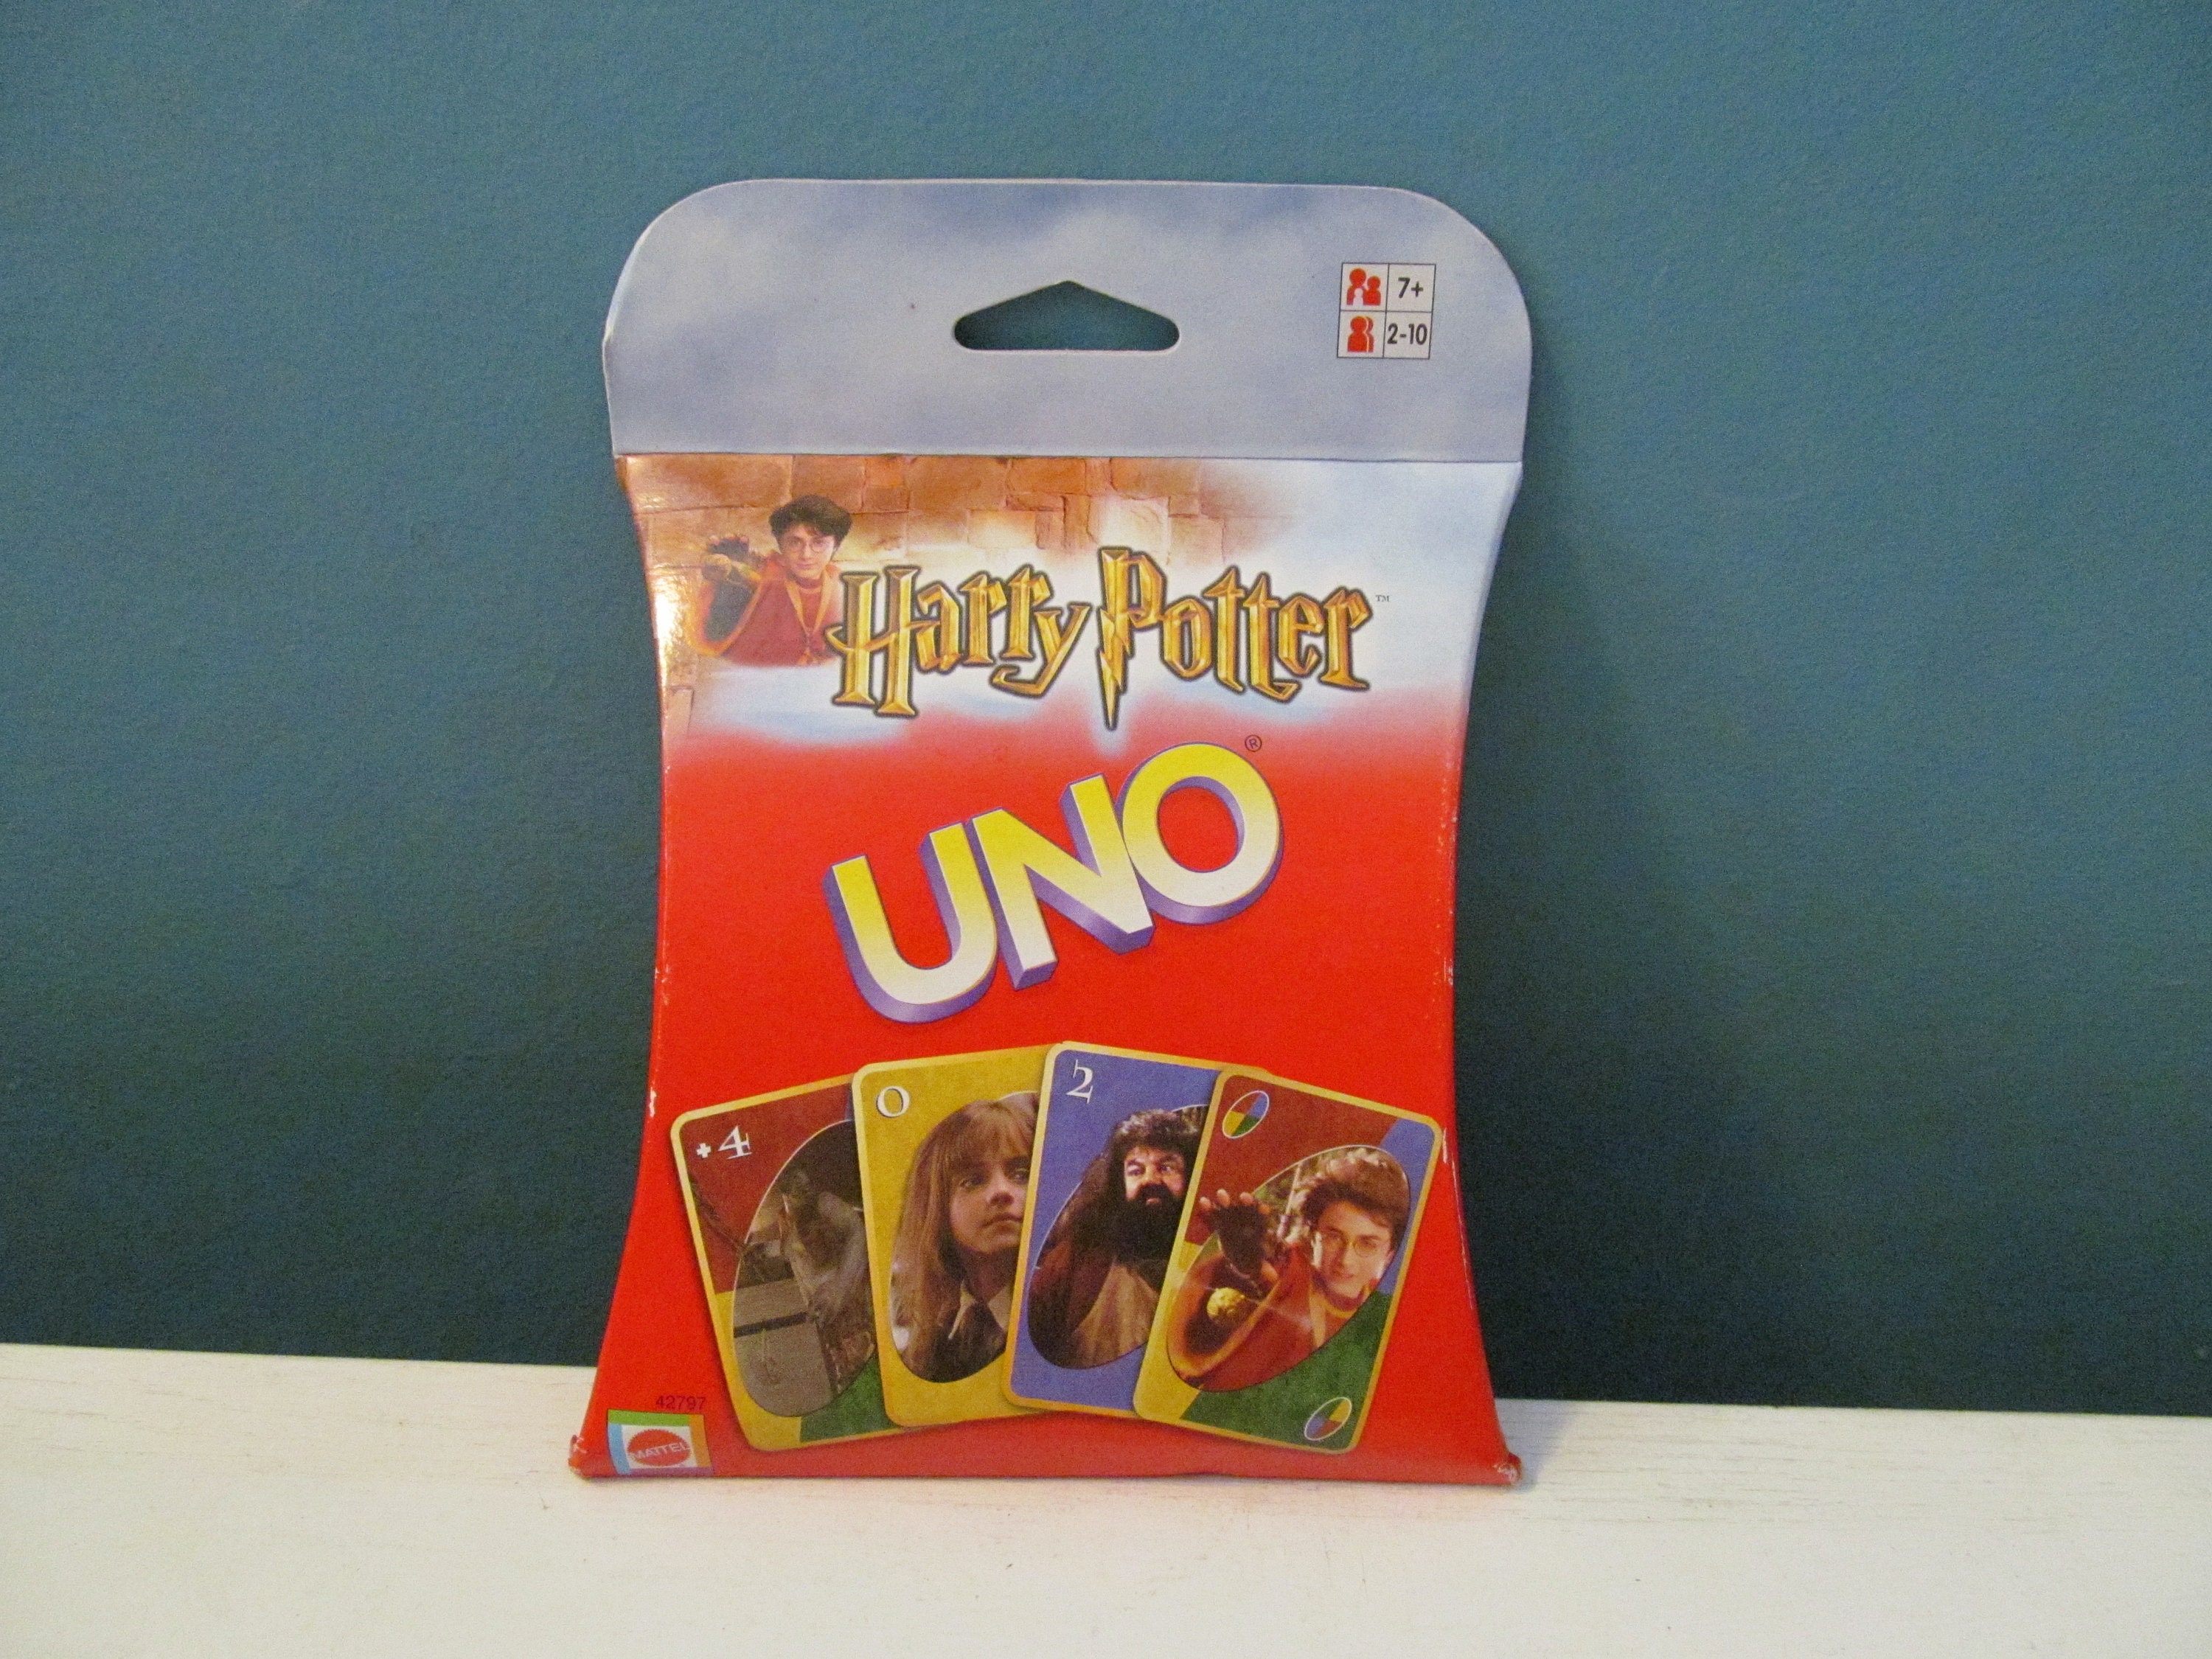  Mattel Games UNO Harry Potter Card Game Tin : Toys & Games